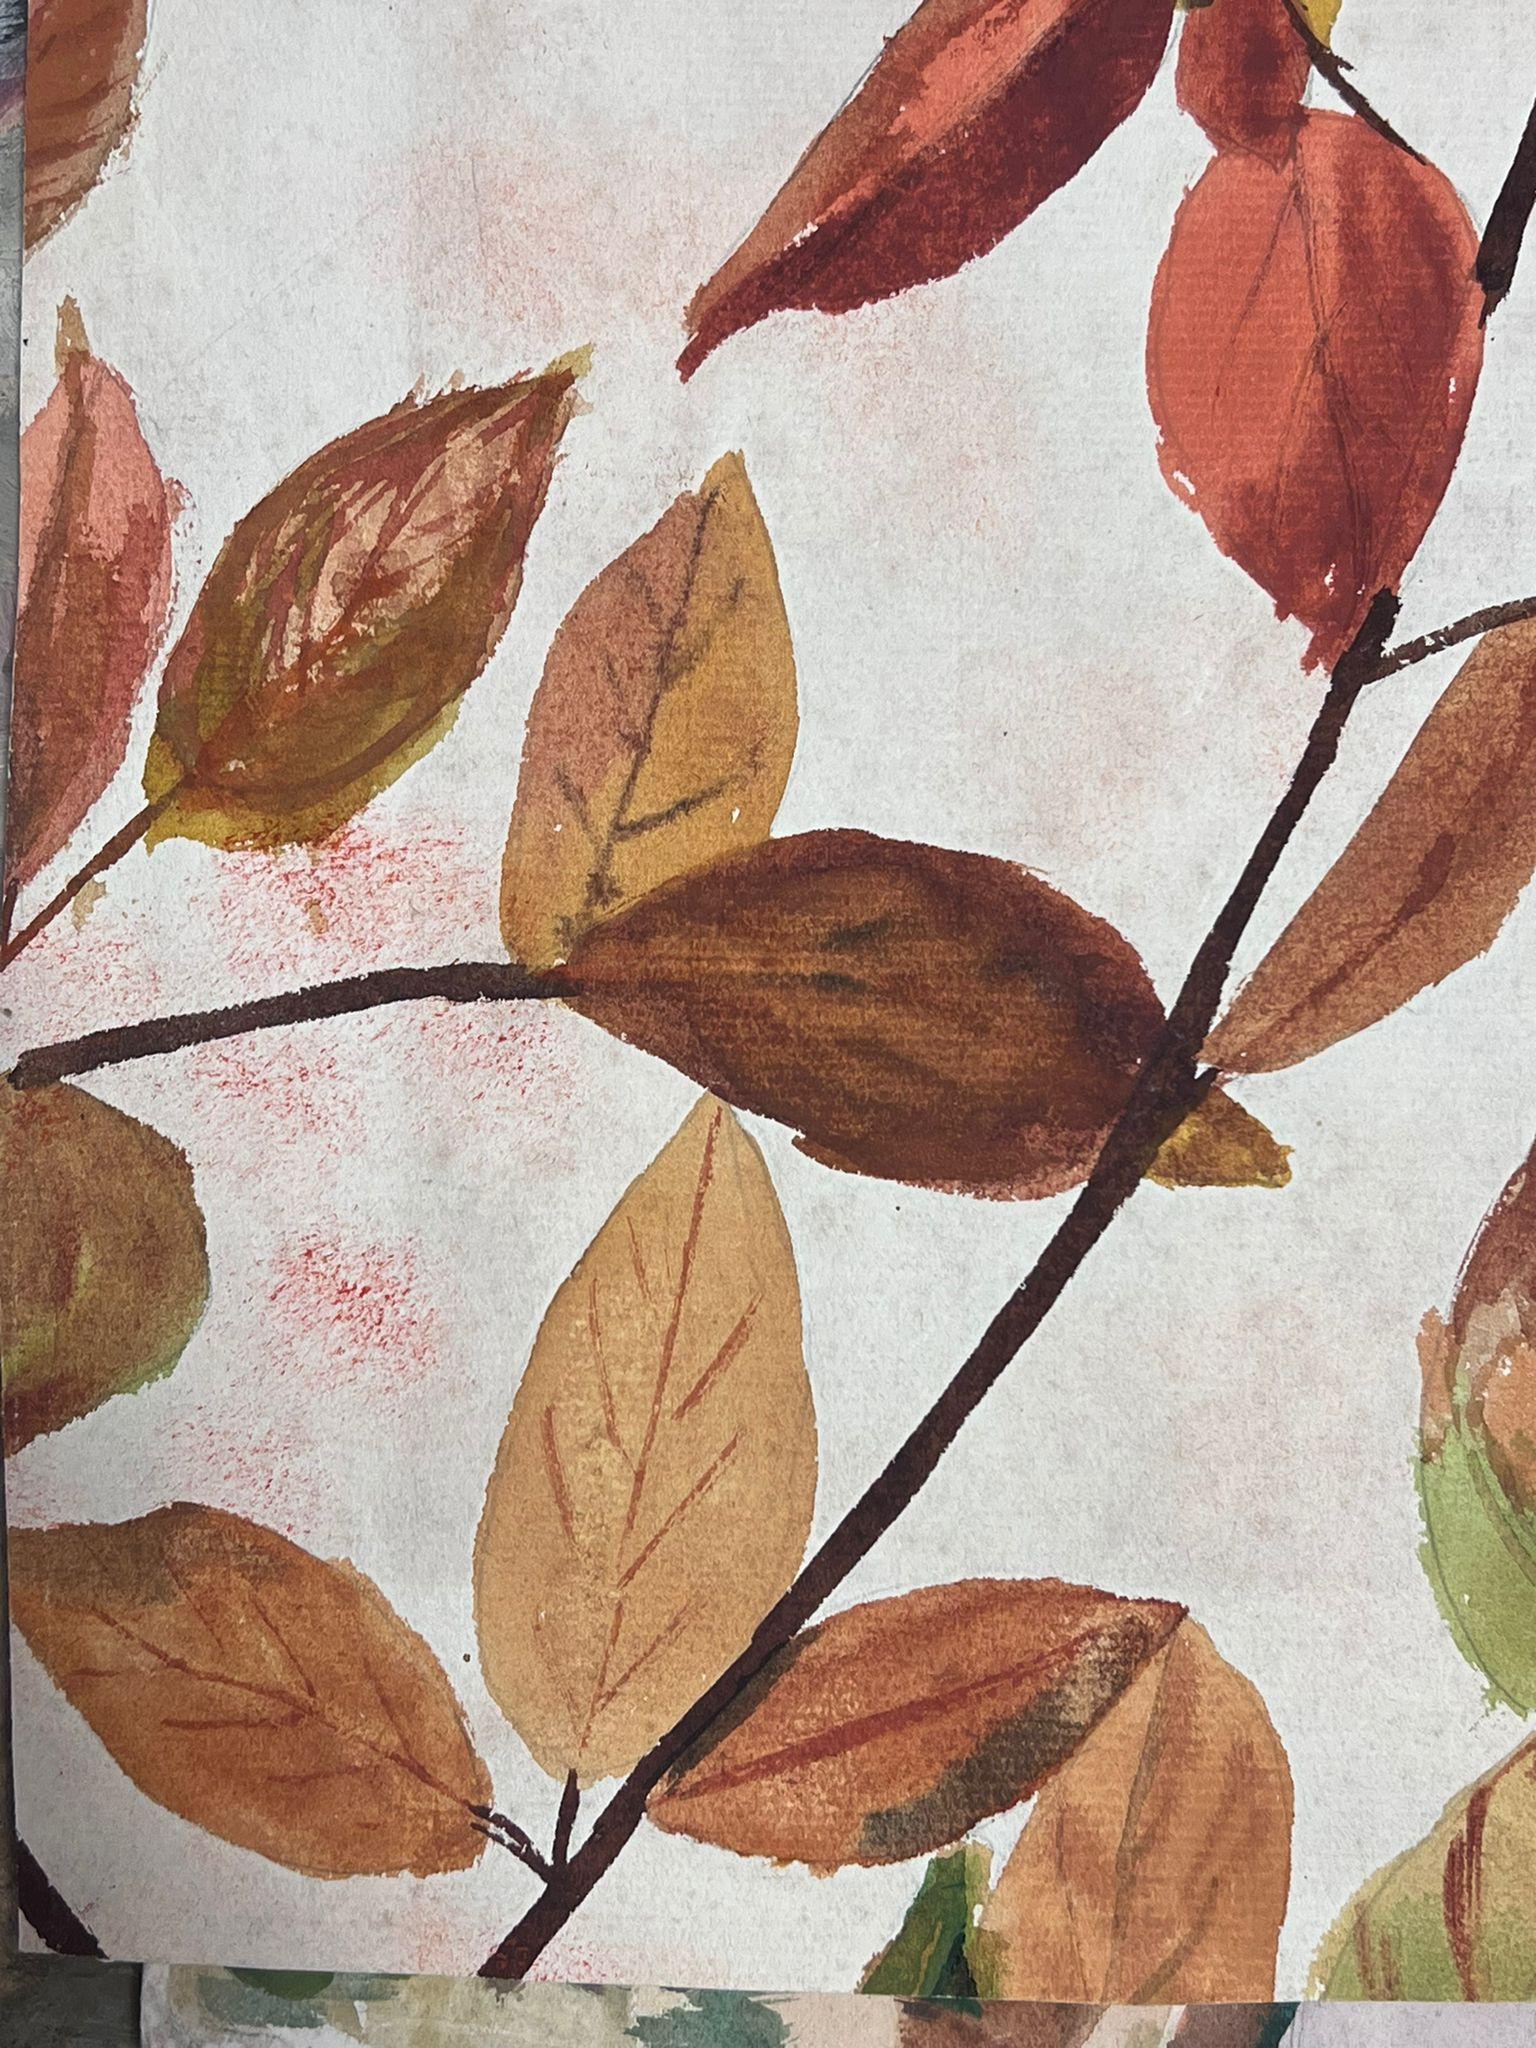 Autumnal Leafs
by Louise Alix, French 1950's Impressionist 
watercolour on artist paper, unframed
painting: 13 x 10.75 inches
provenance: from a large private collection of this artists work in Northern France
condition: original, good and sound